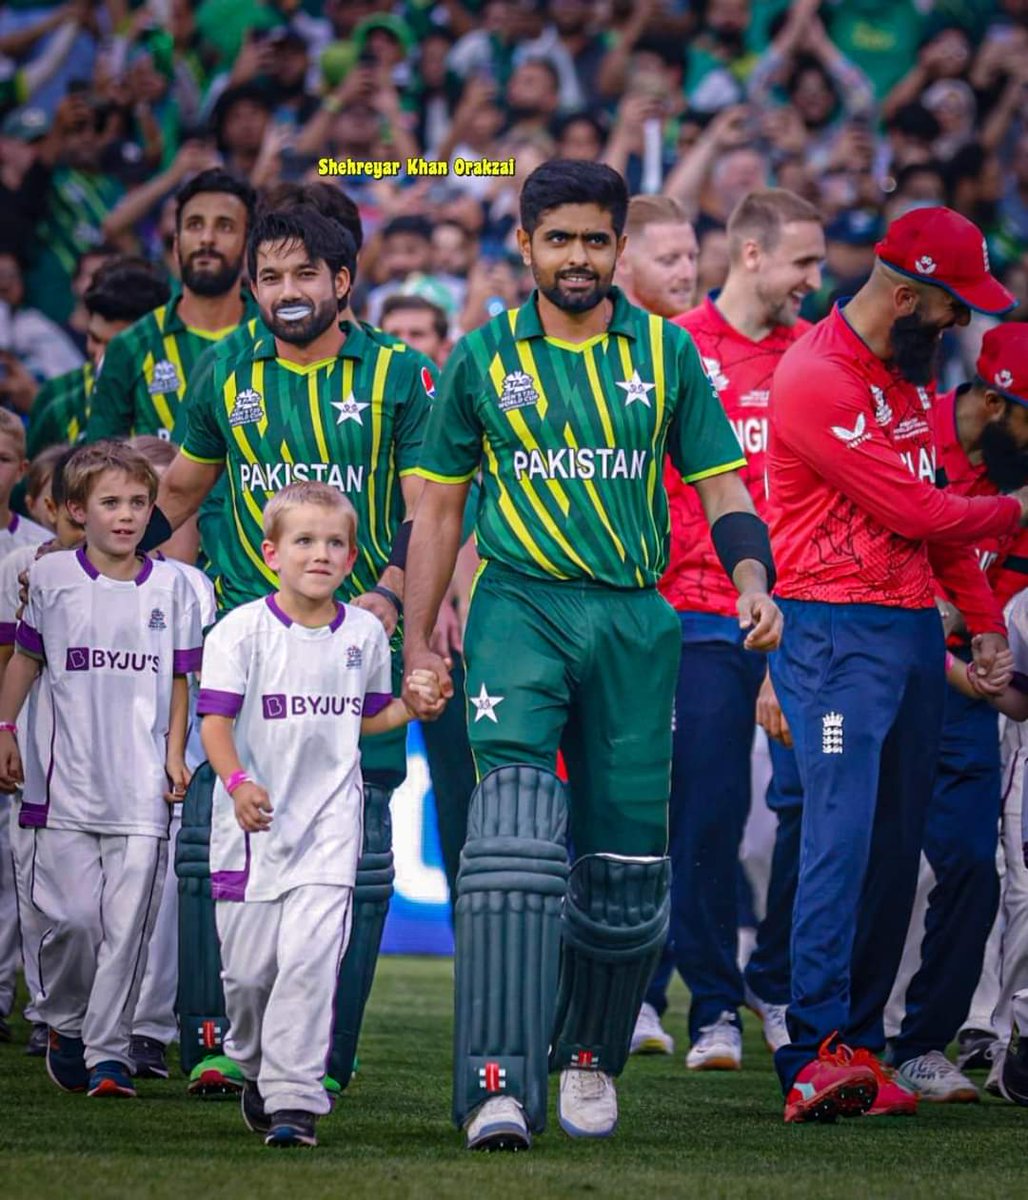 Breaking news 🚨:

Babar Azam moved up to No 4 in latest ICC T20I rankings after he played a brilliant innings 69(44) at the strike rate of 156+ in the 5th T20I against Newzealand!!!! 💚

#BabarAzam | #BabarAzam𓃵